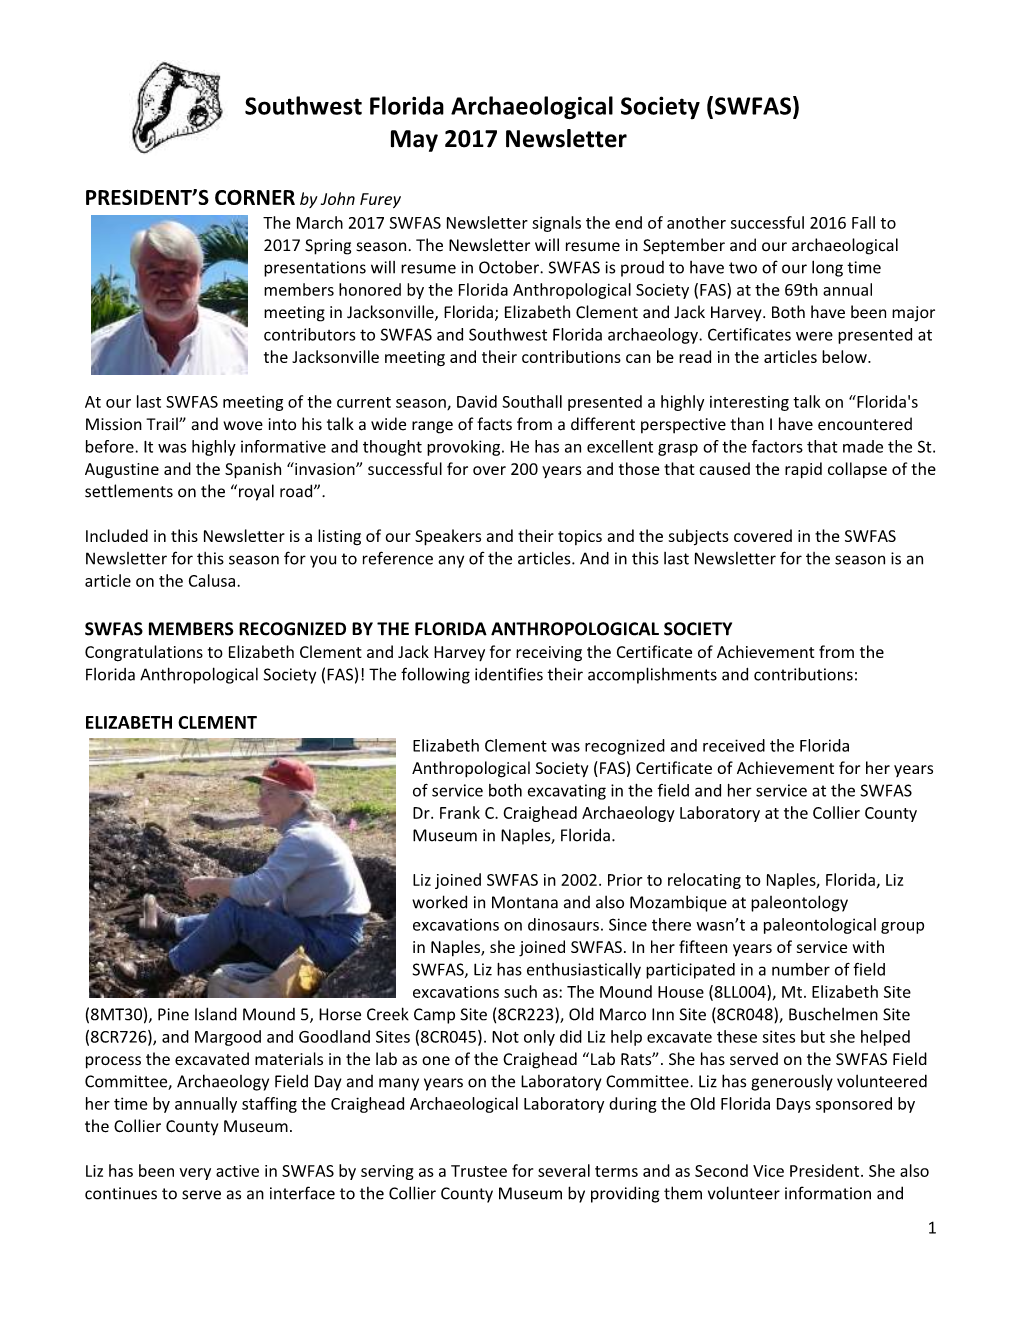 Southwest Florida Archaeological Society (SWFAS) May 2017 Newsletter